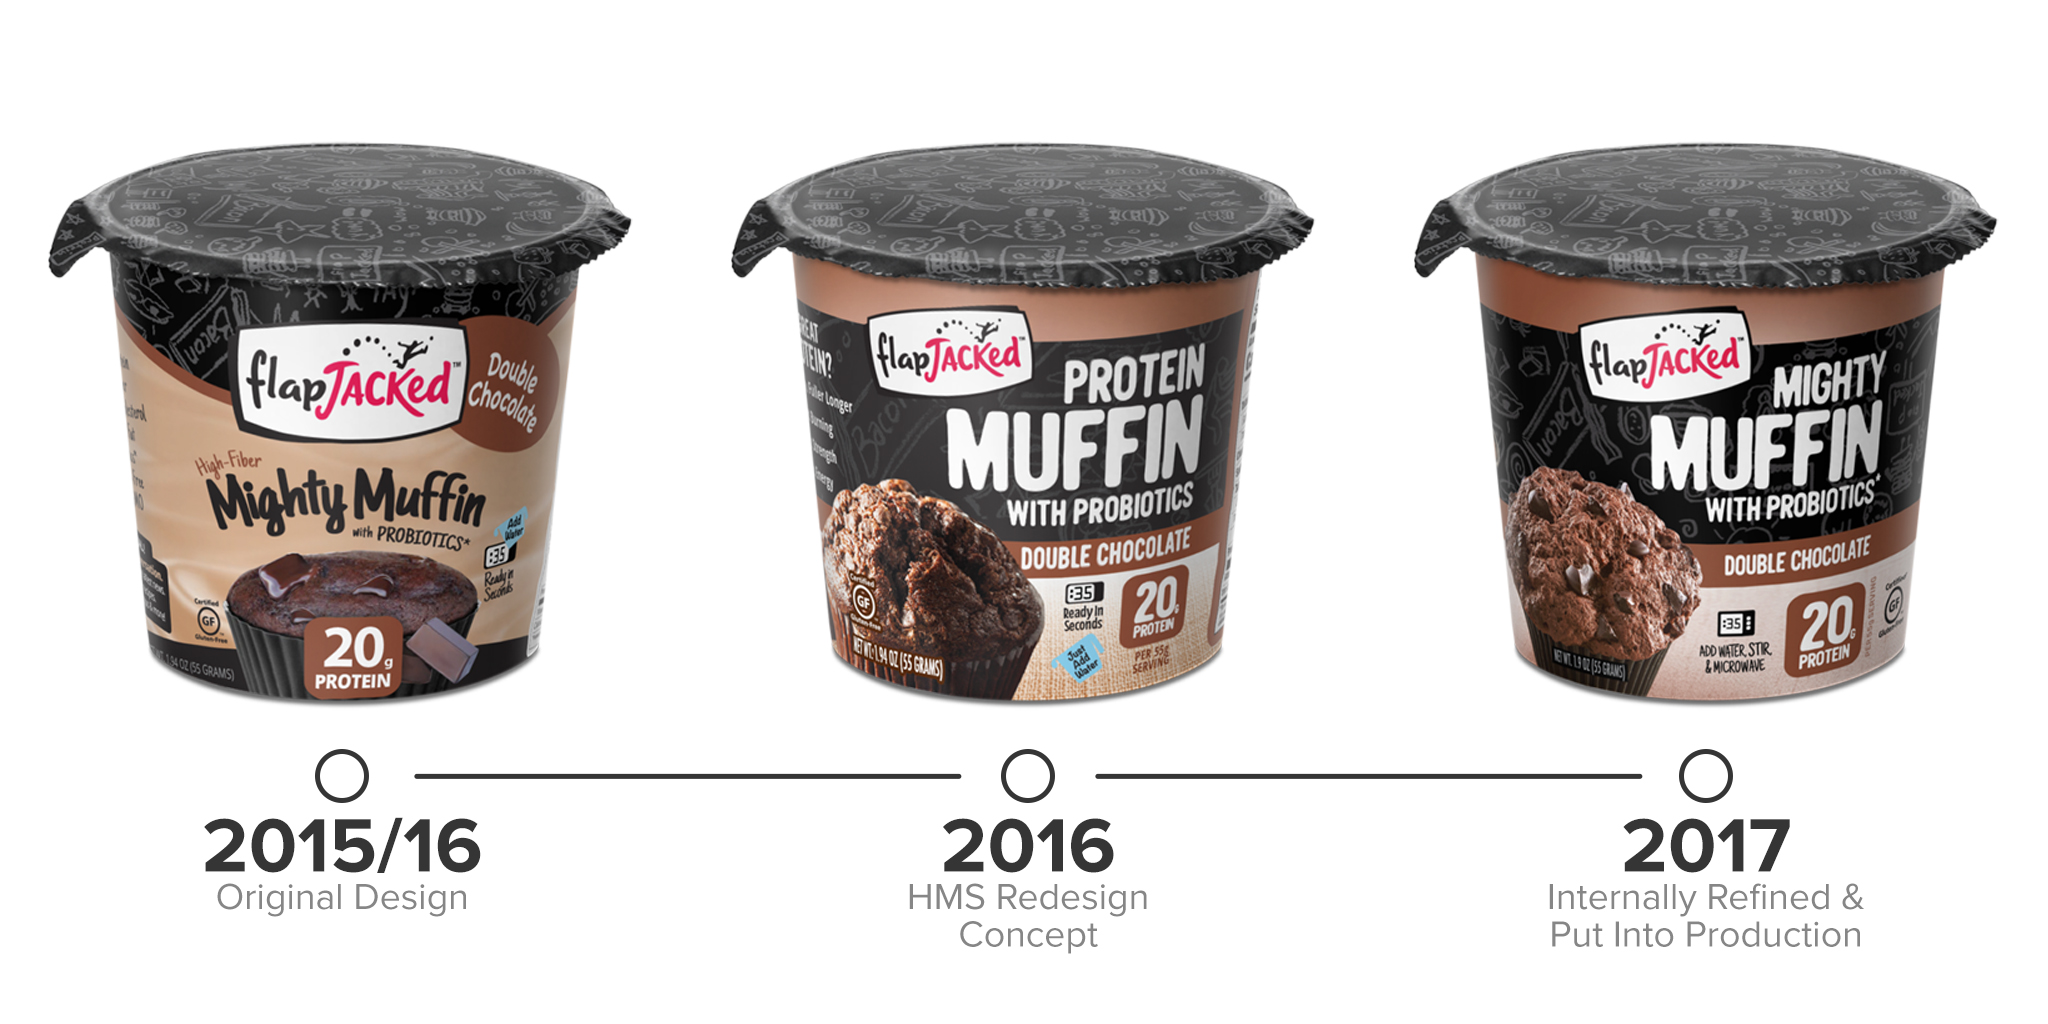 Mighty Muffin Packaging Evolution 2015/2017